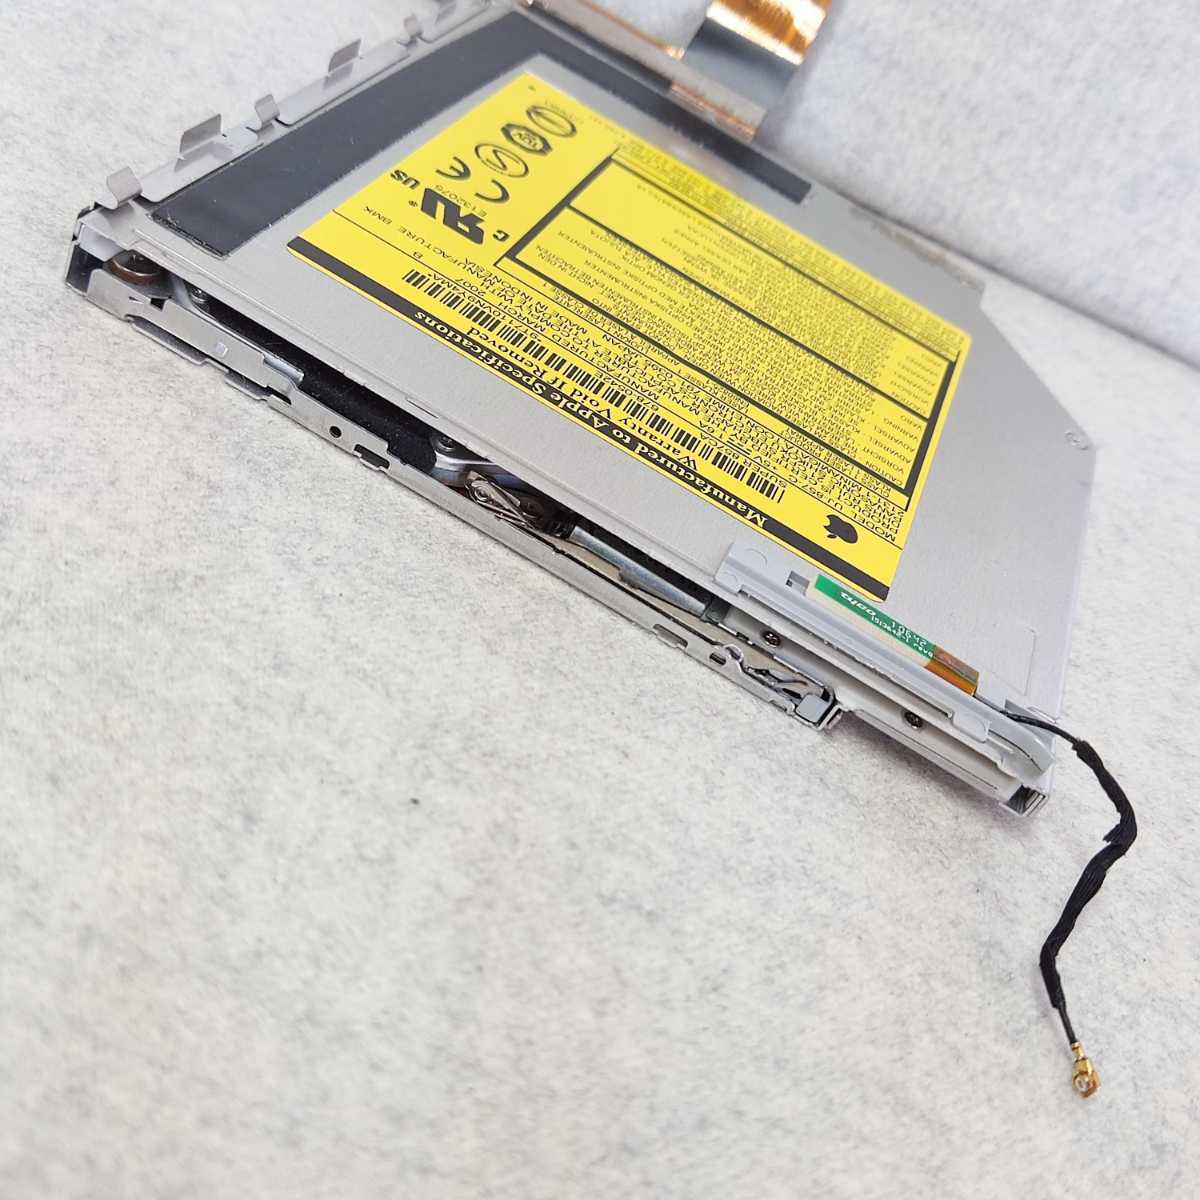  special delivery carriage less MacBook A1181 13 -inch Late 2006/Mid 2007/Early 2008 etc. for slot in type DVD Drive Panasonic UJ-857C IDE * Y033D